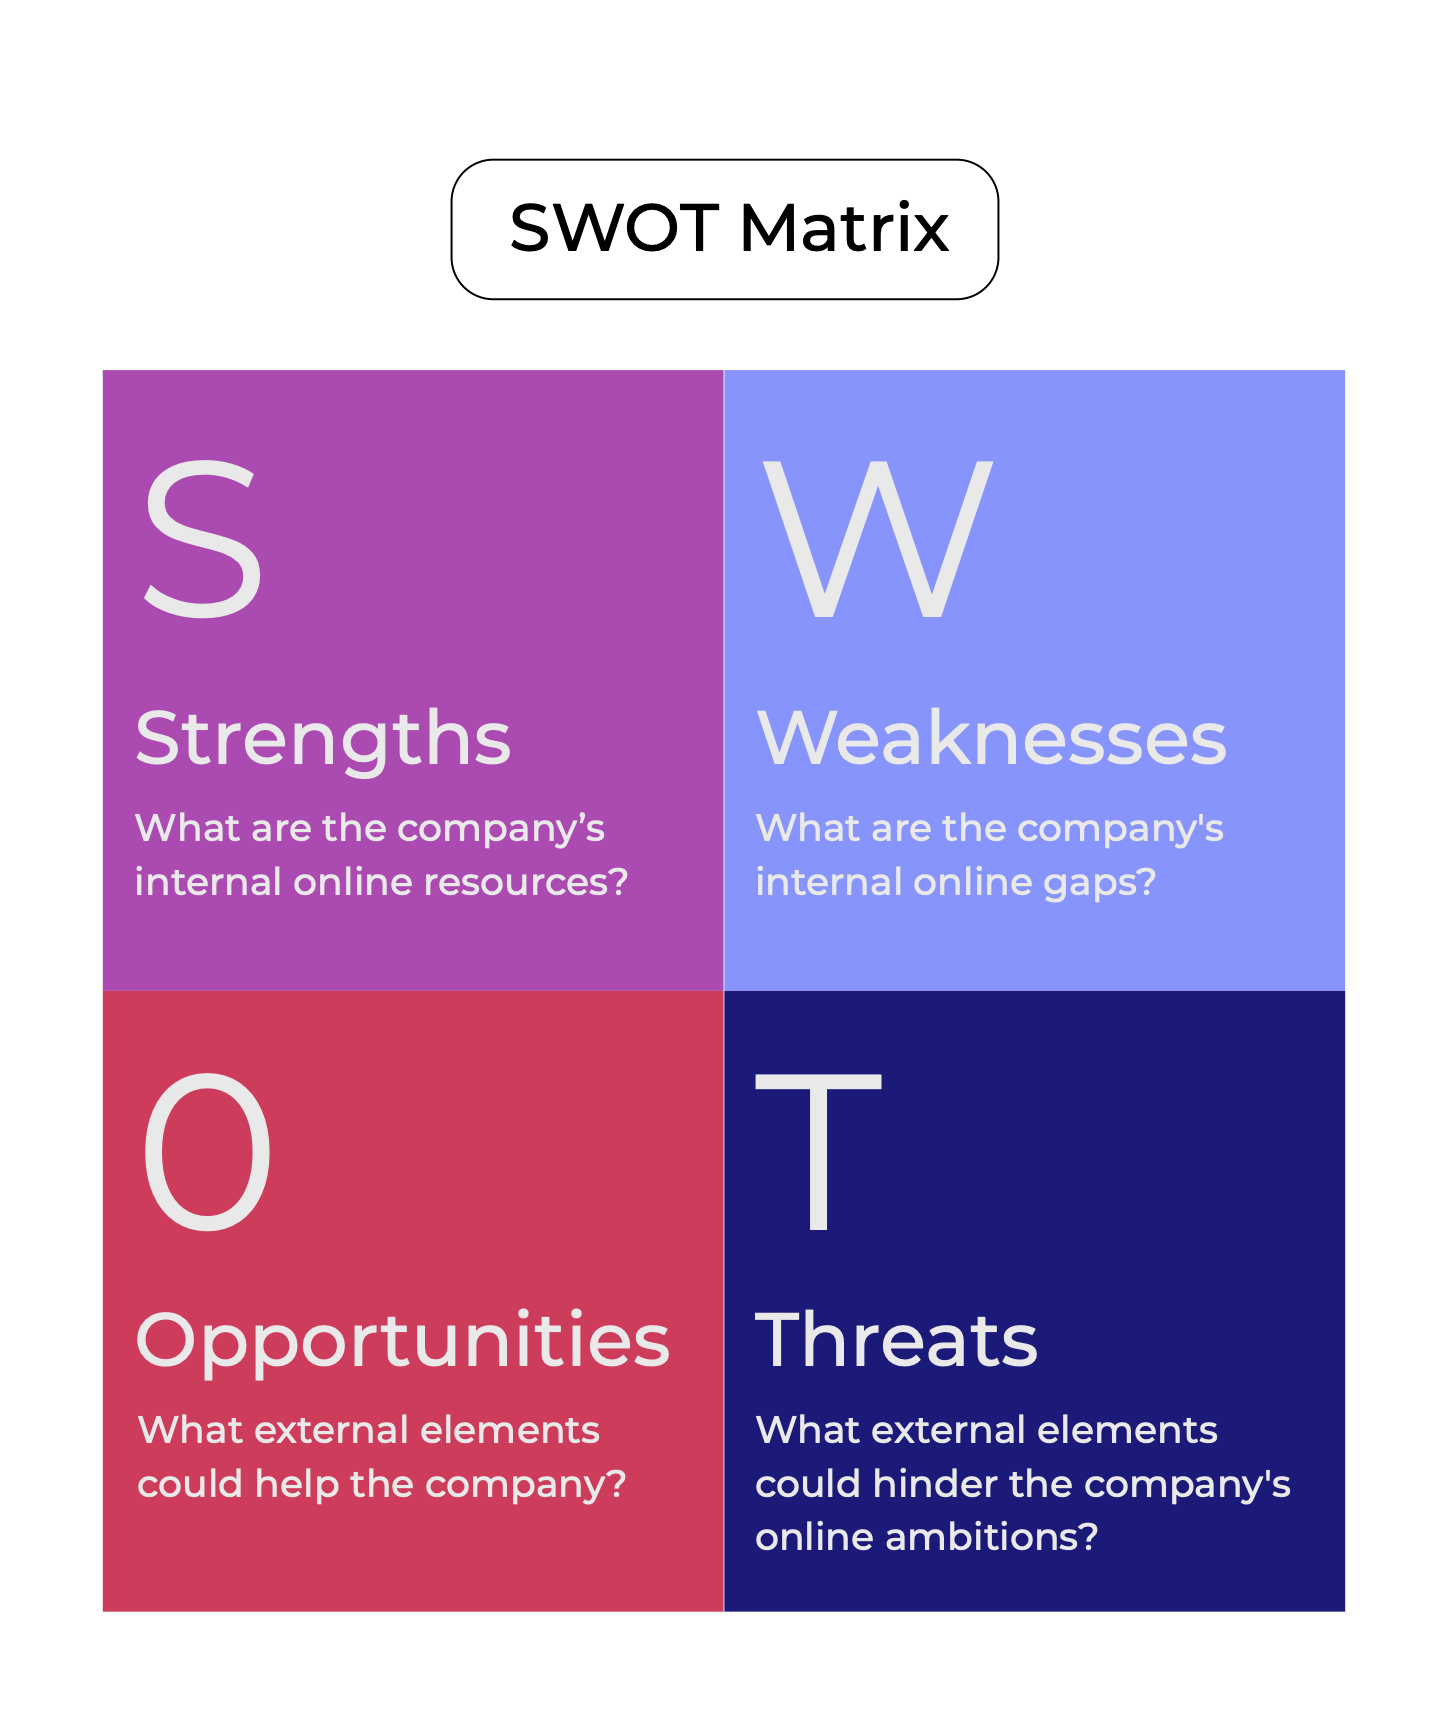 Diagram of the SWOT matrix in the form of a table divided into 4 parts: Strengths, Weaknesses, Opportunities, Threats